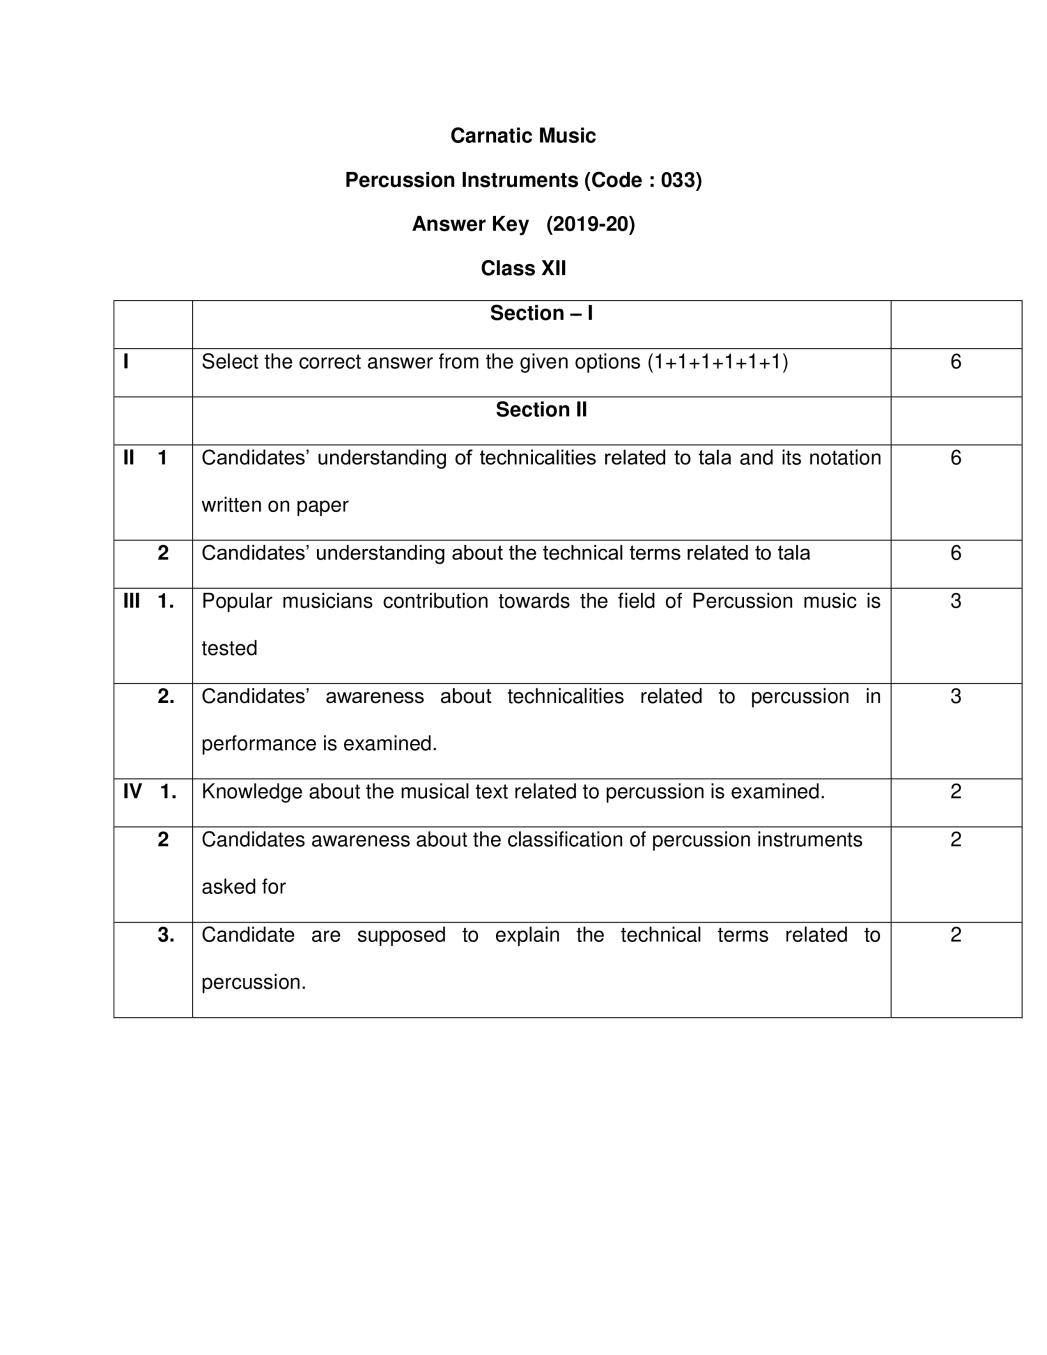 CBSE Class 12 Marking Scheme 2020 for Carnatic Music (Percussion Instrument) - Page 1